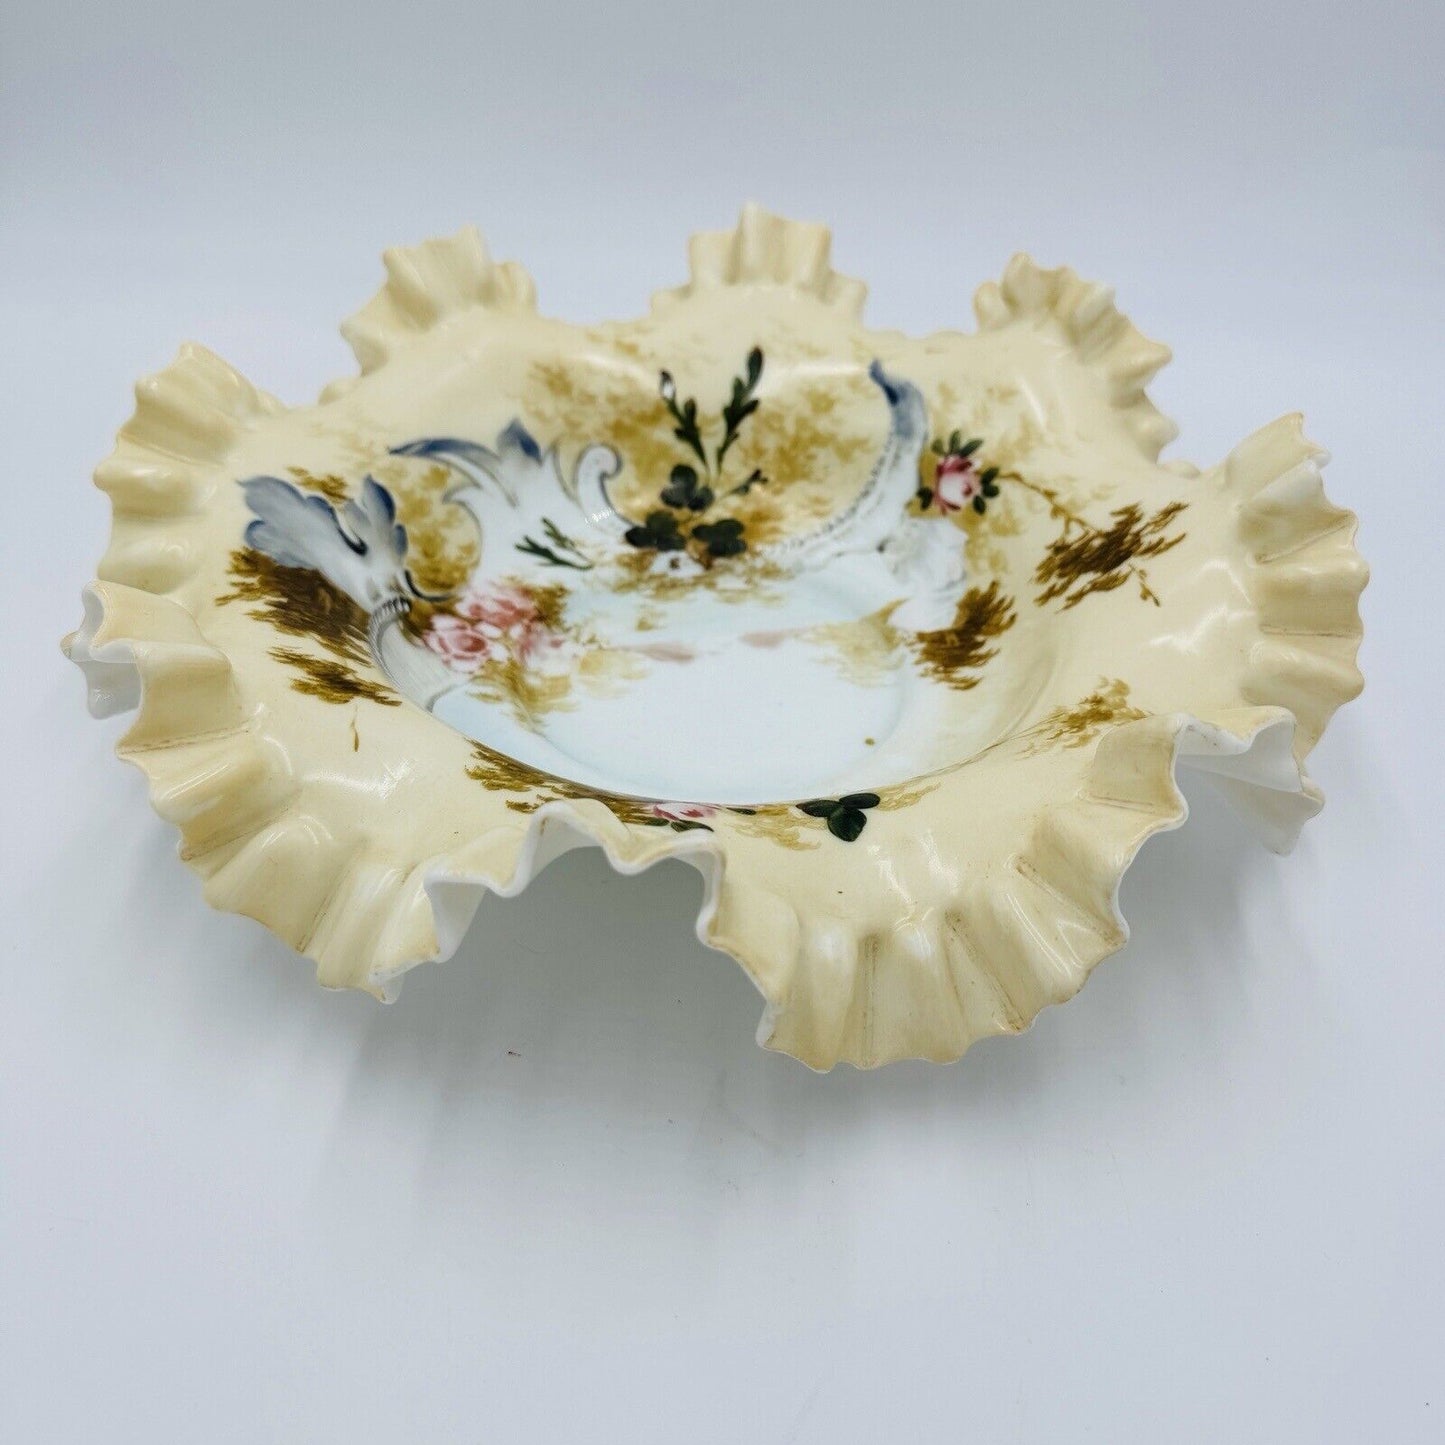 Antique Victorian Art Glass Ruffle Handpainted Bowl Large Floral